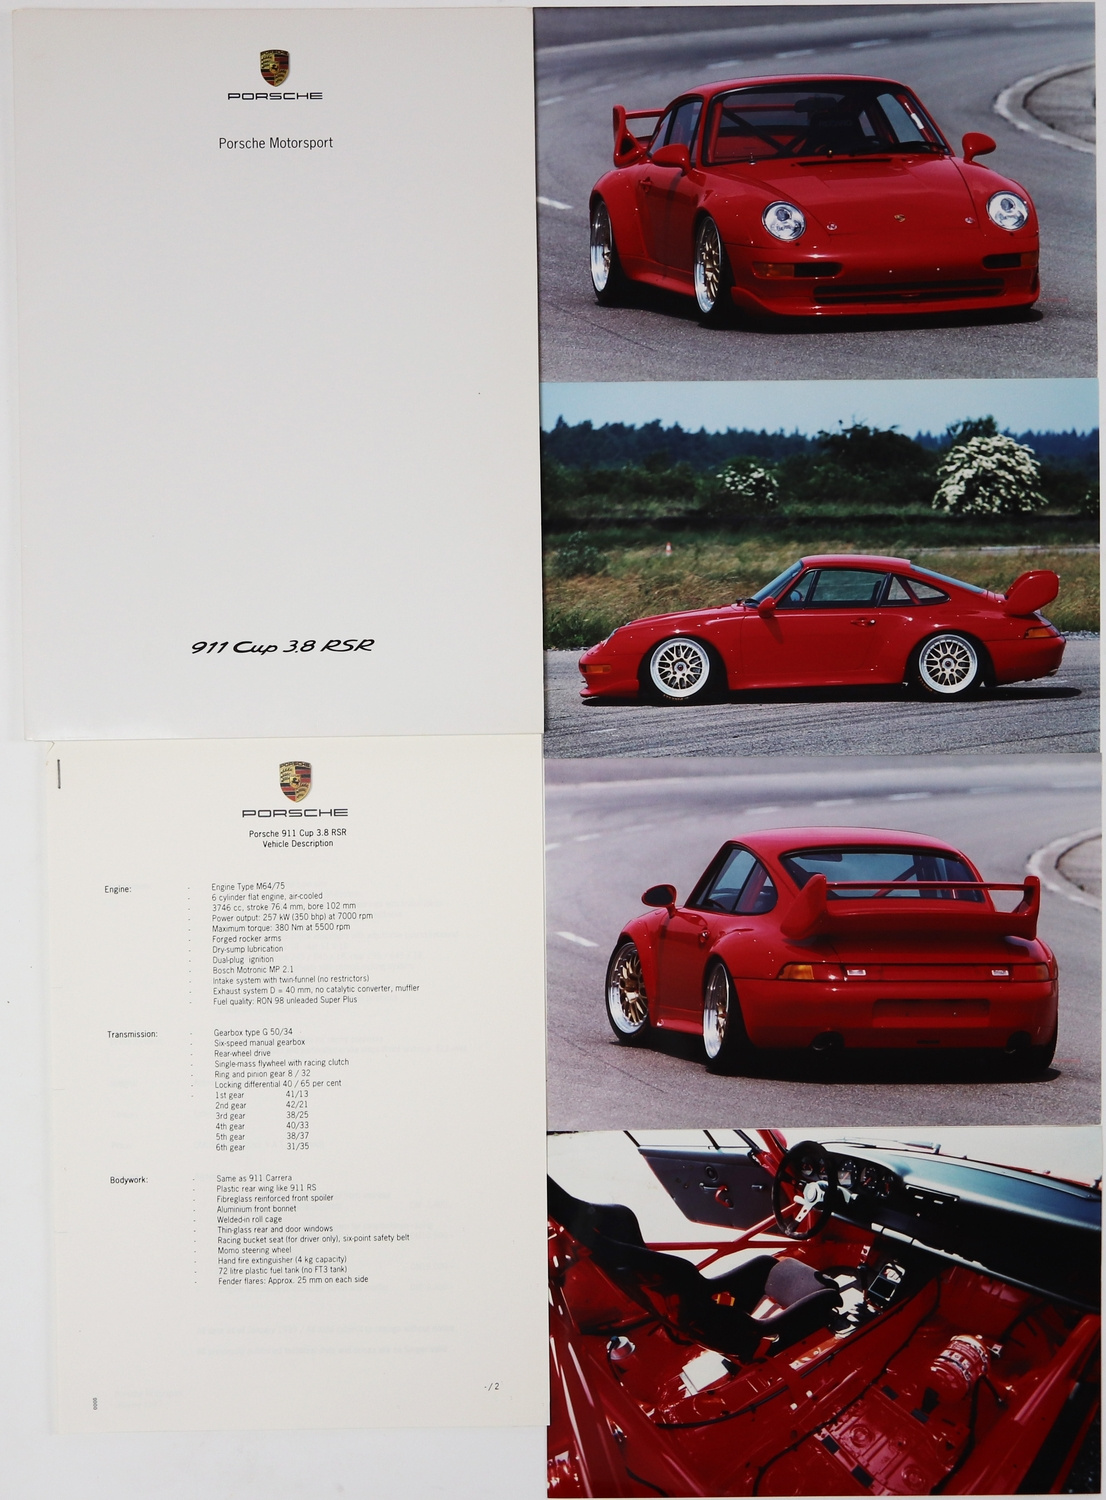 Porsche Press Kit Type 911 Cup 3 8 Rsr From 1997 Classic Driver Market